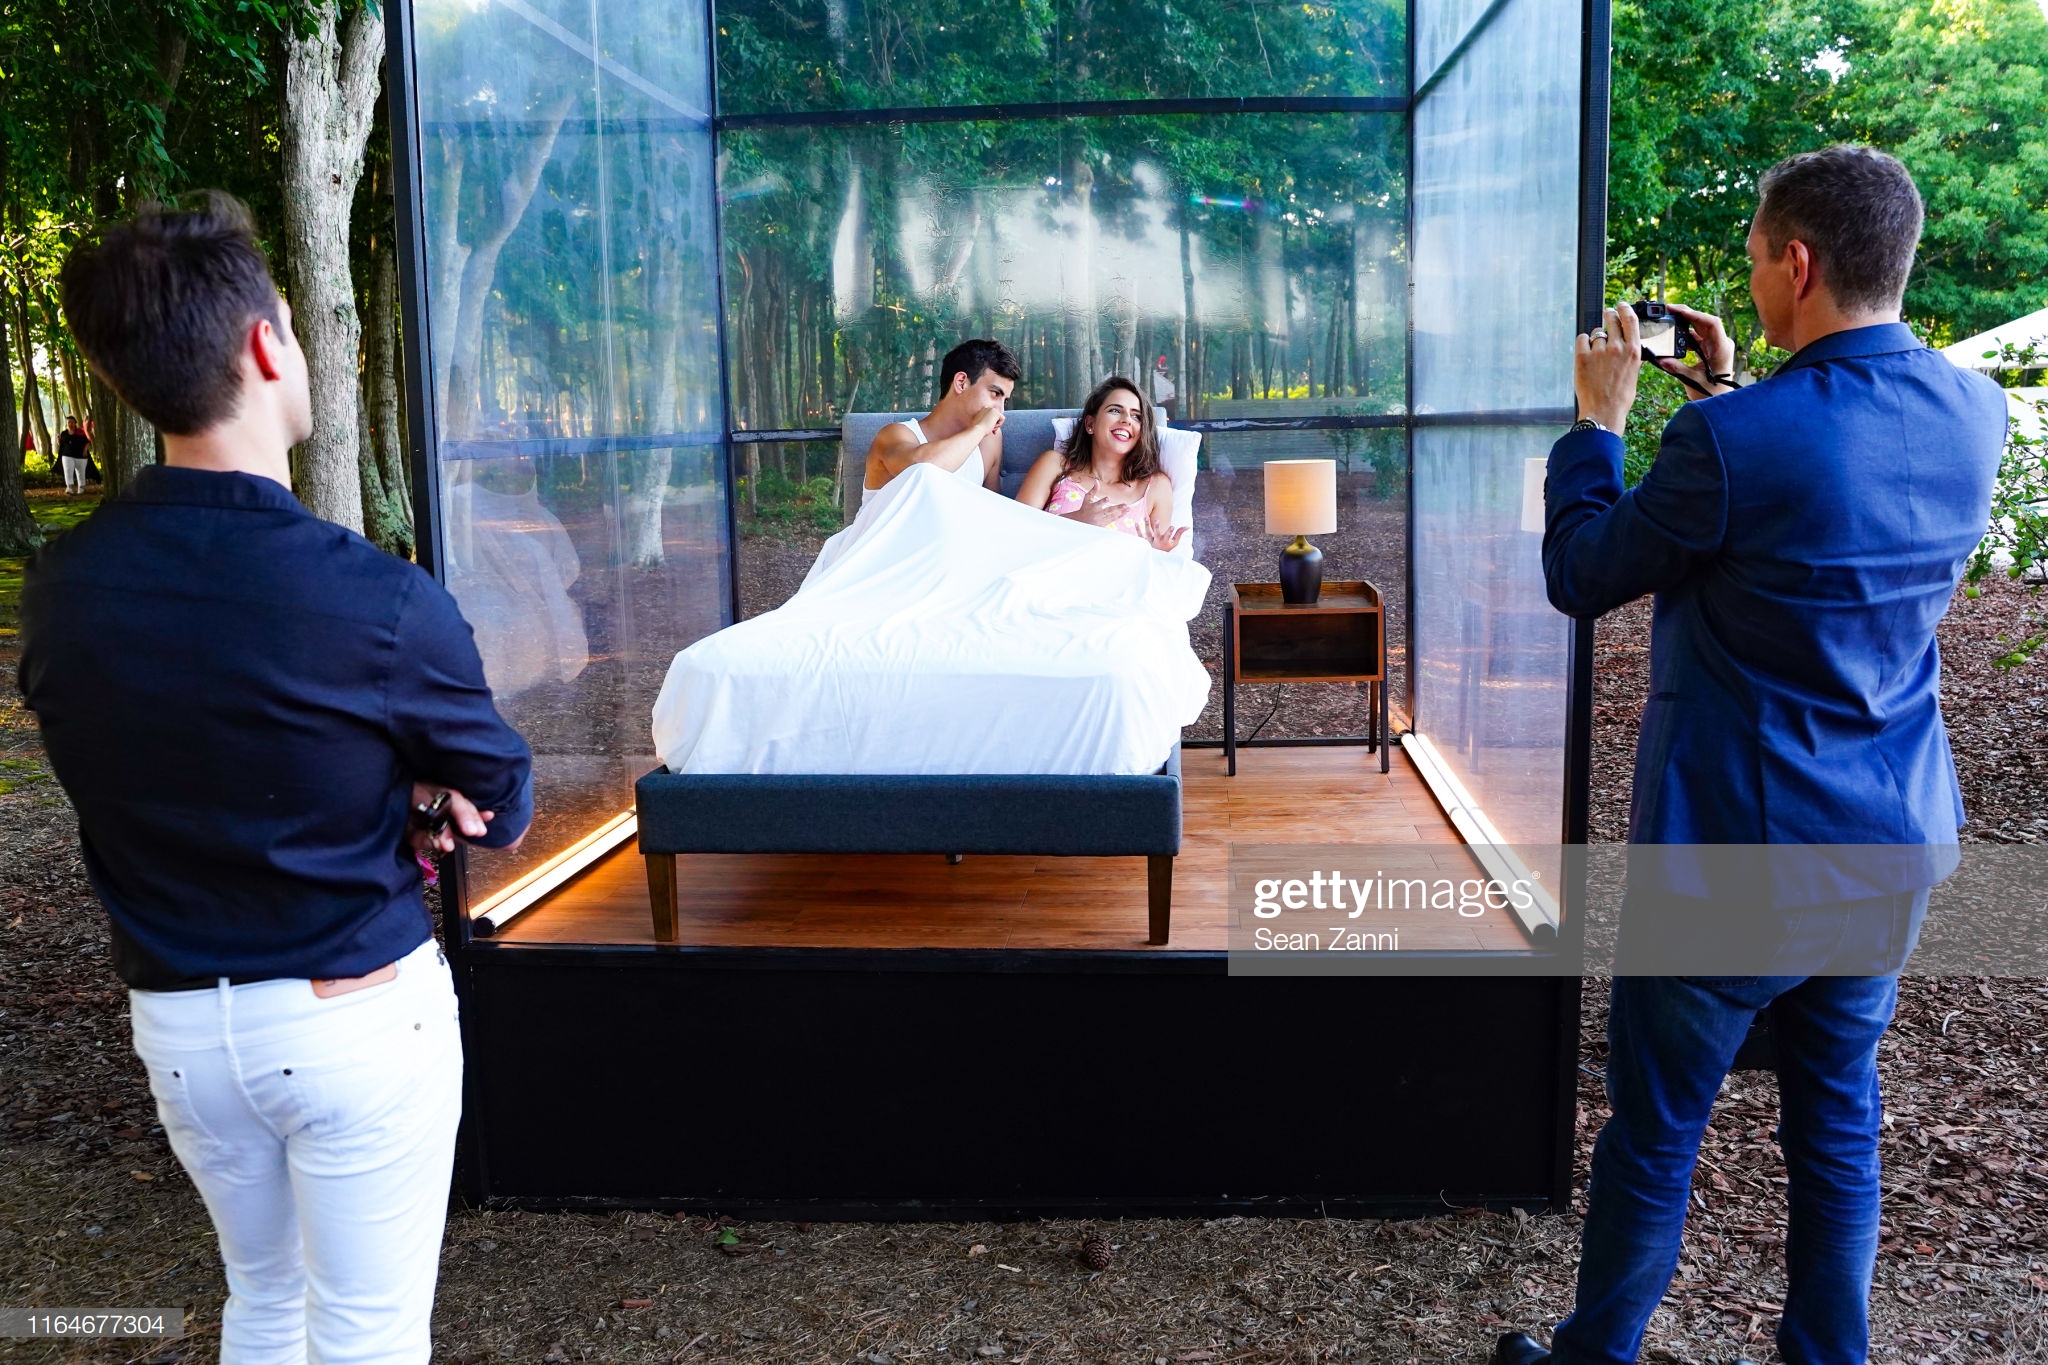 gettyimages-1164677304-2048x2048.jpg